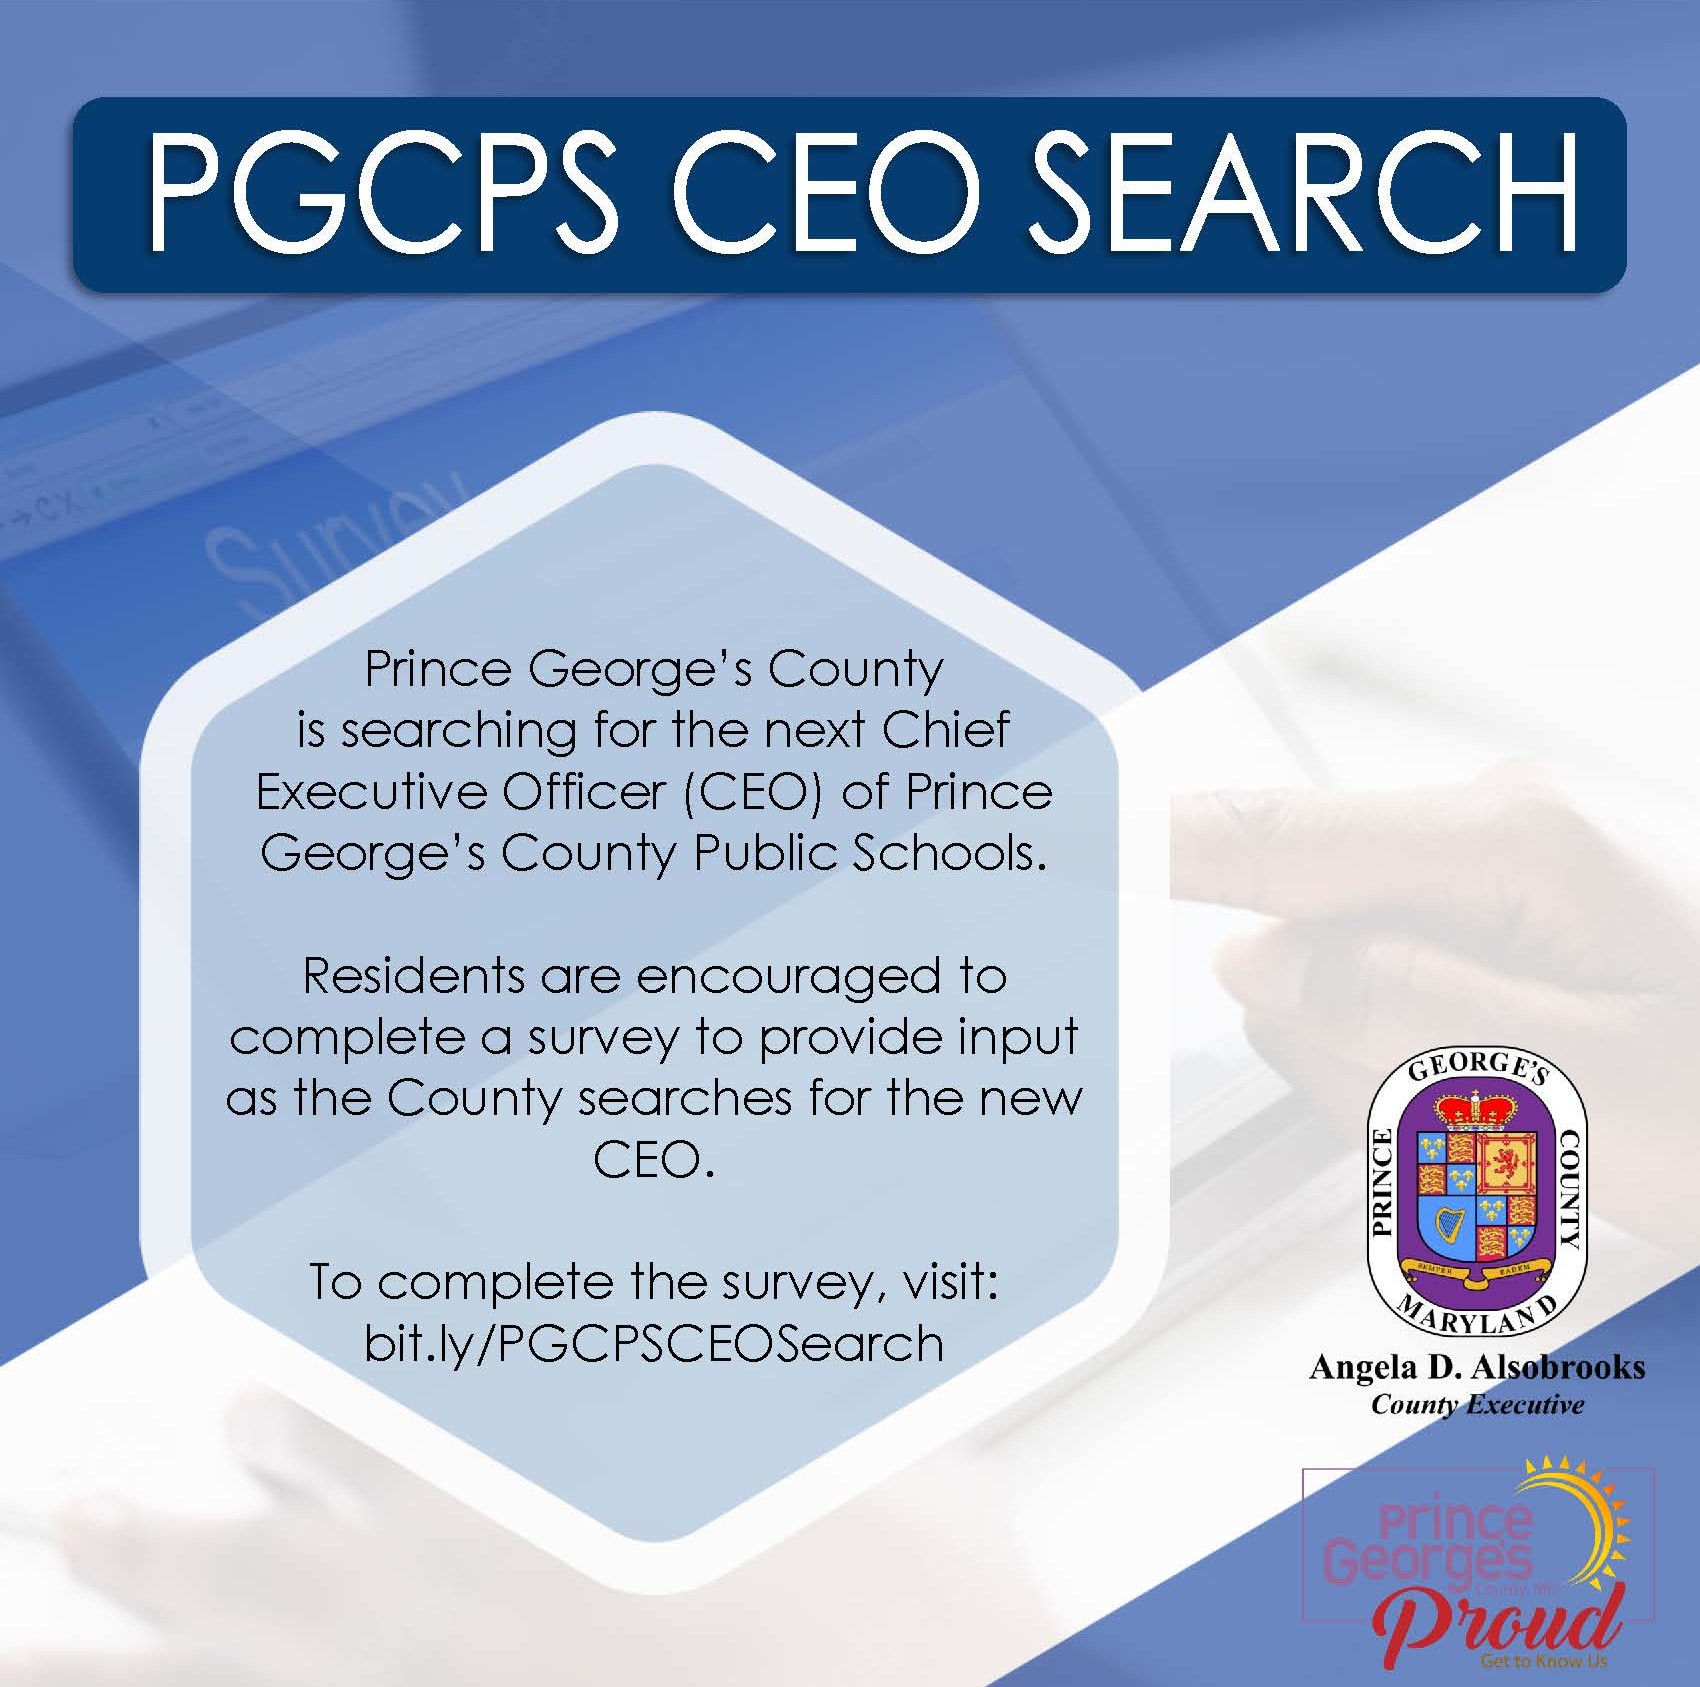 PGCPS CEO Search